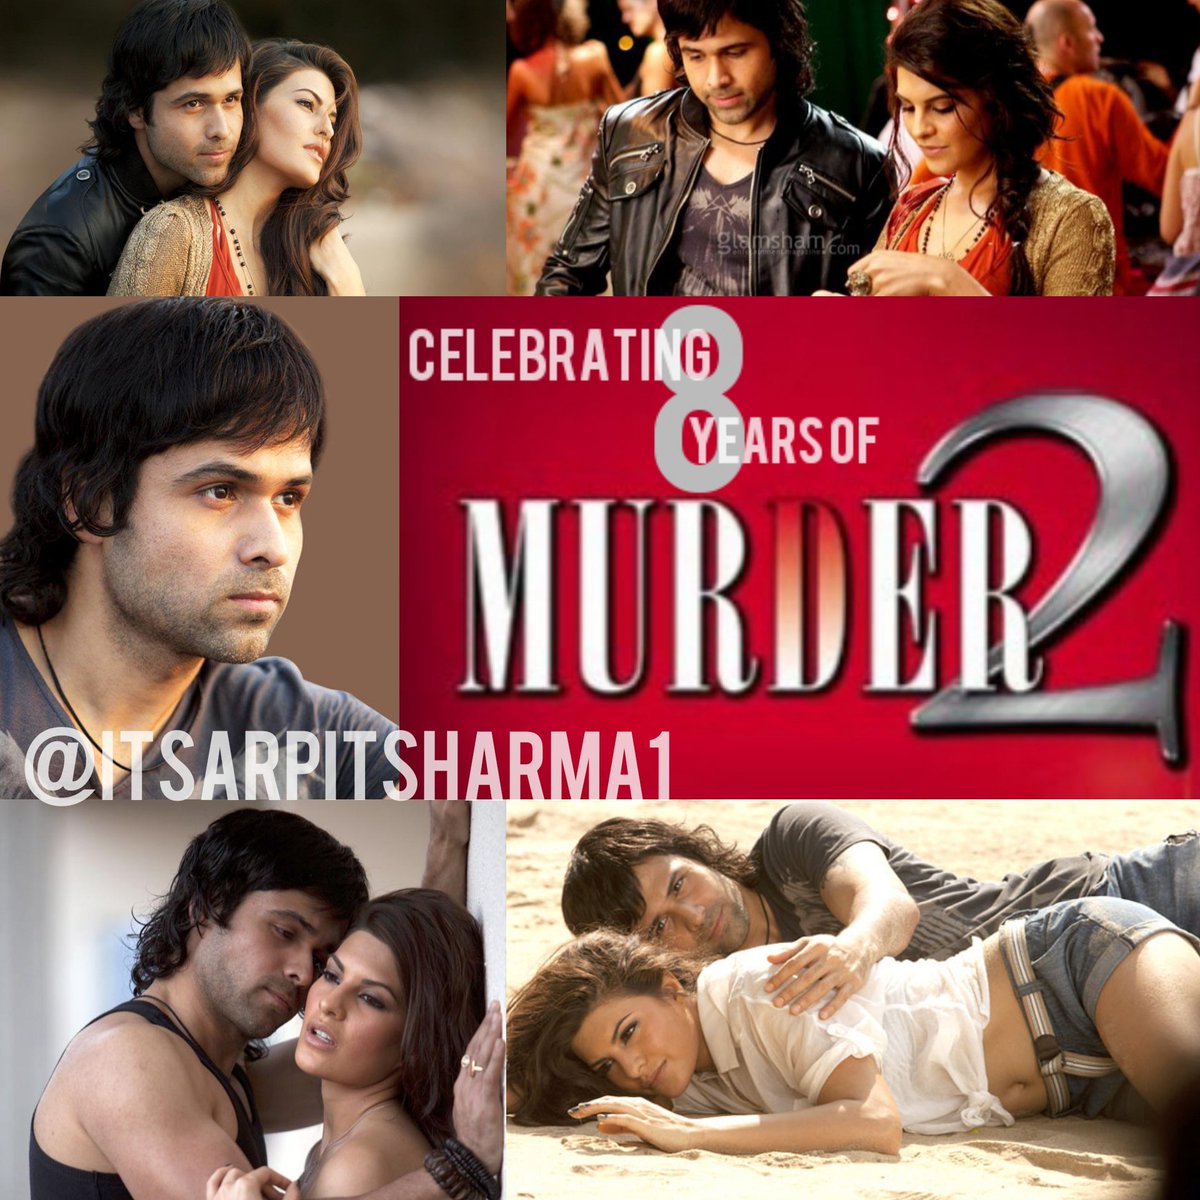 murder 2 video songs free download mp3